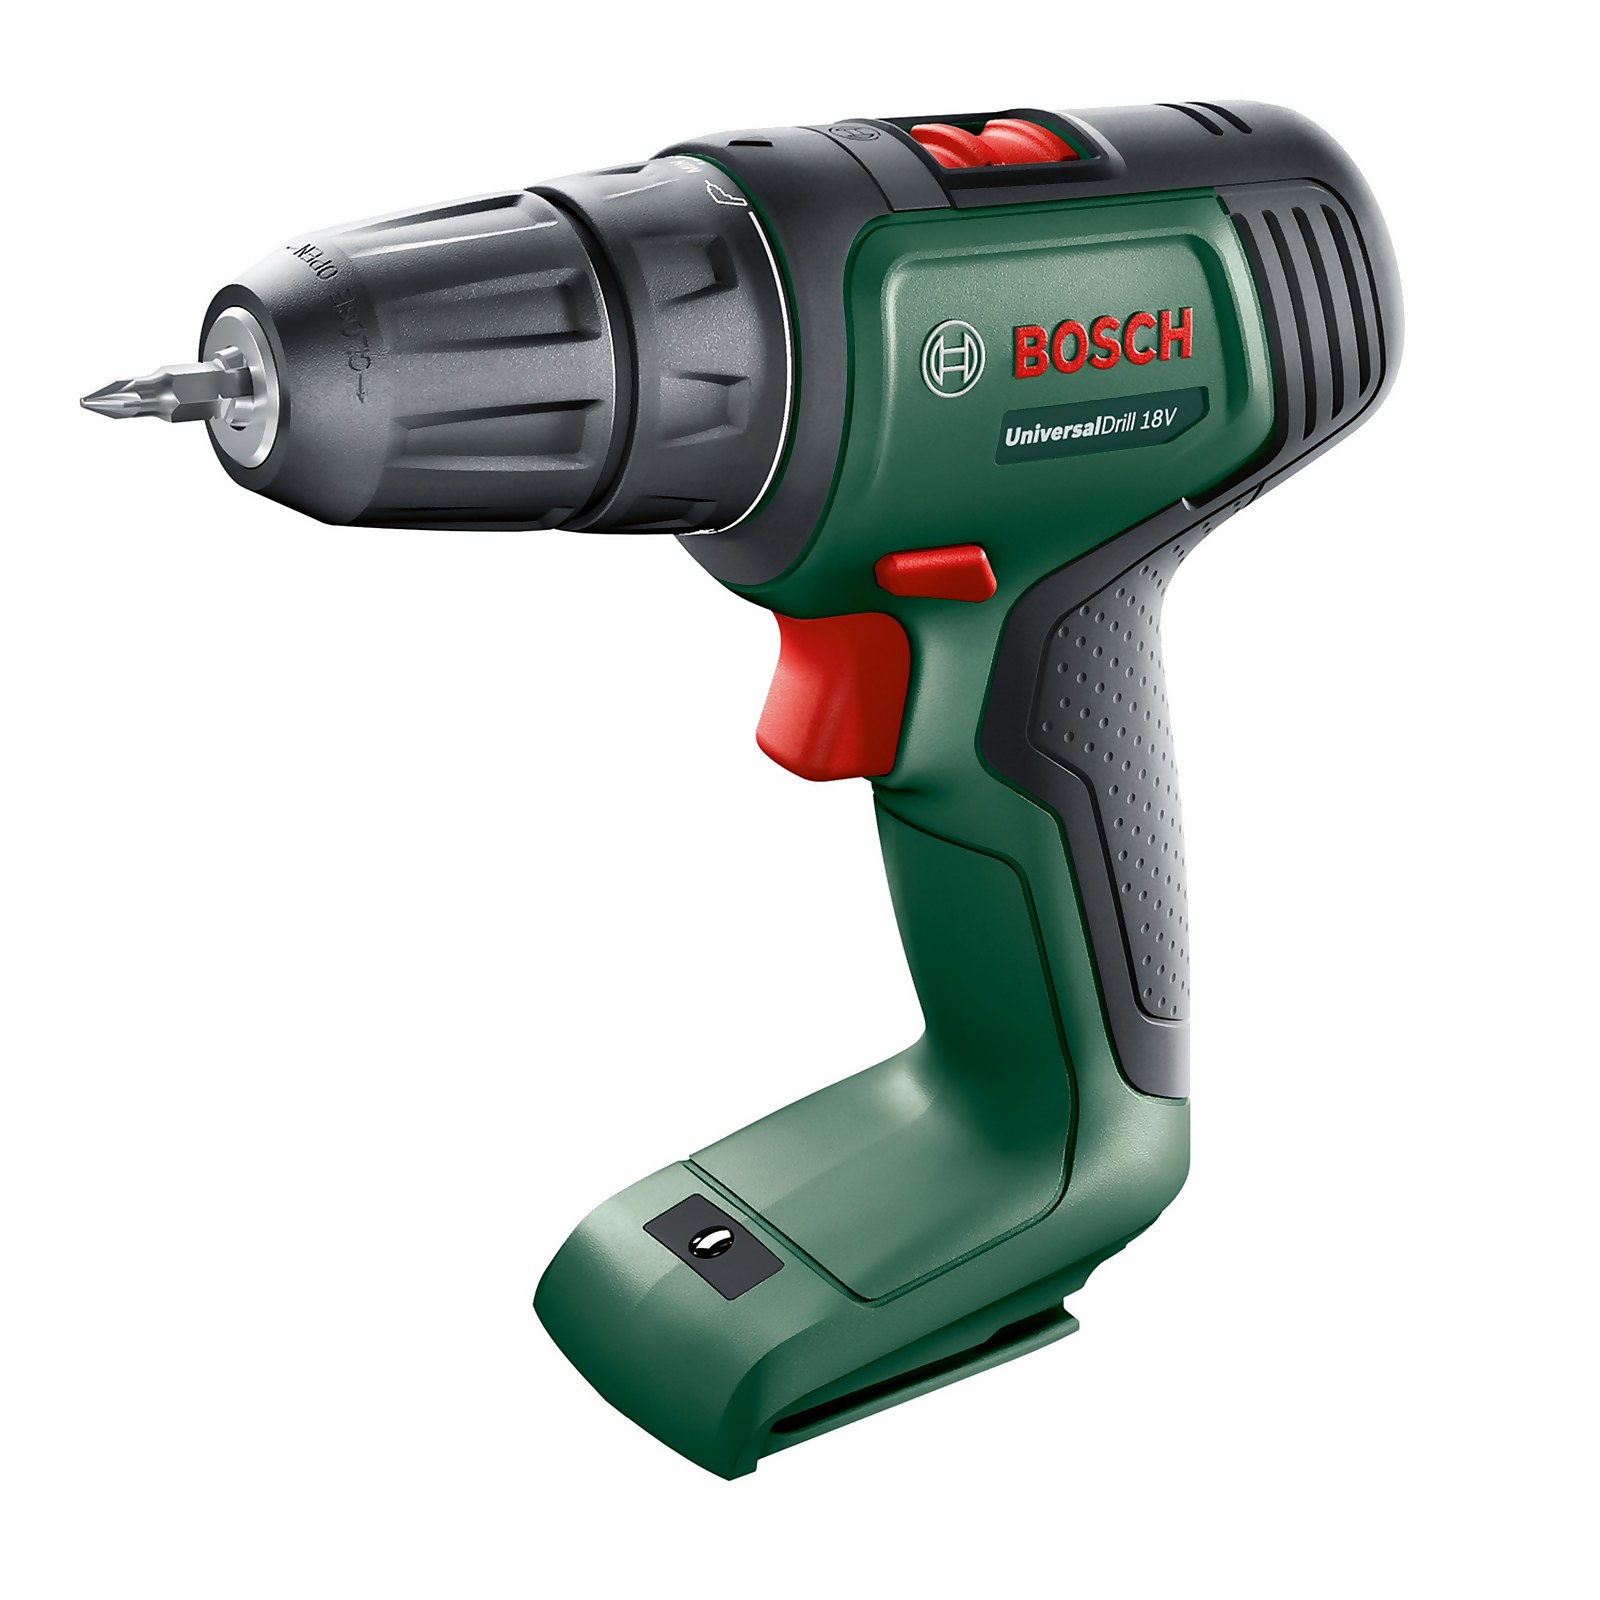 Photo of Bosch Universaldrill 18v -no Battery Included-